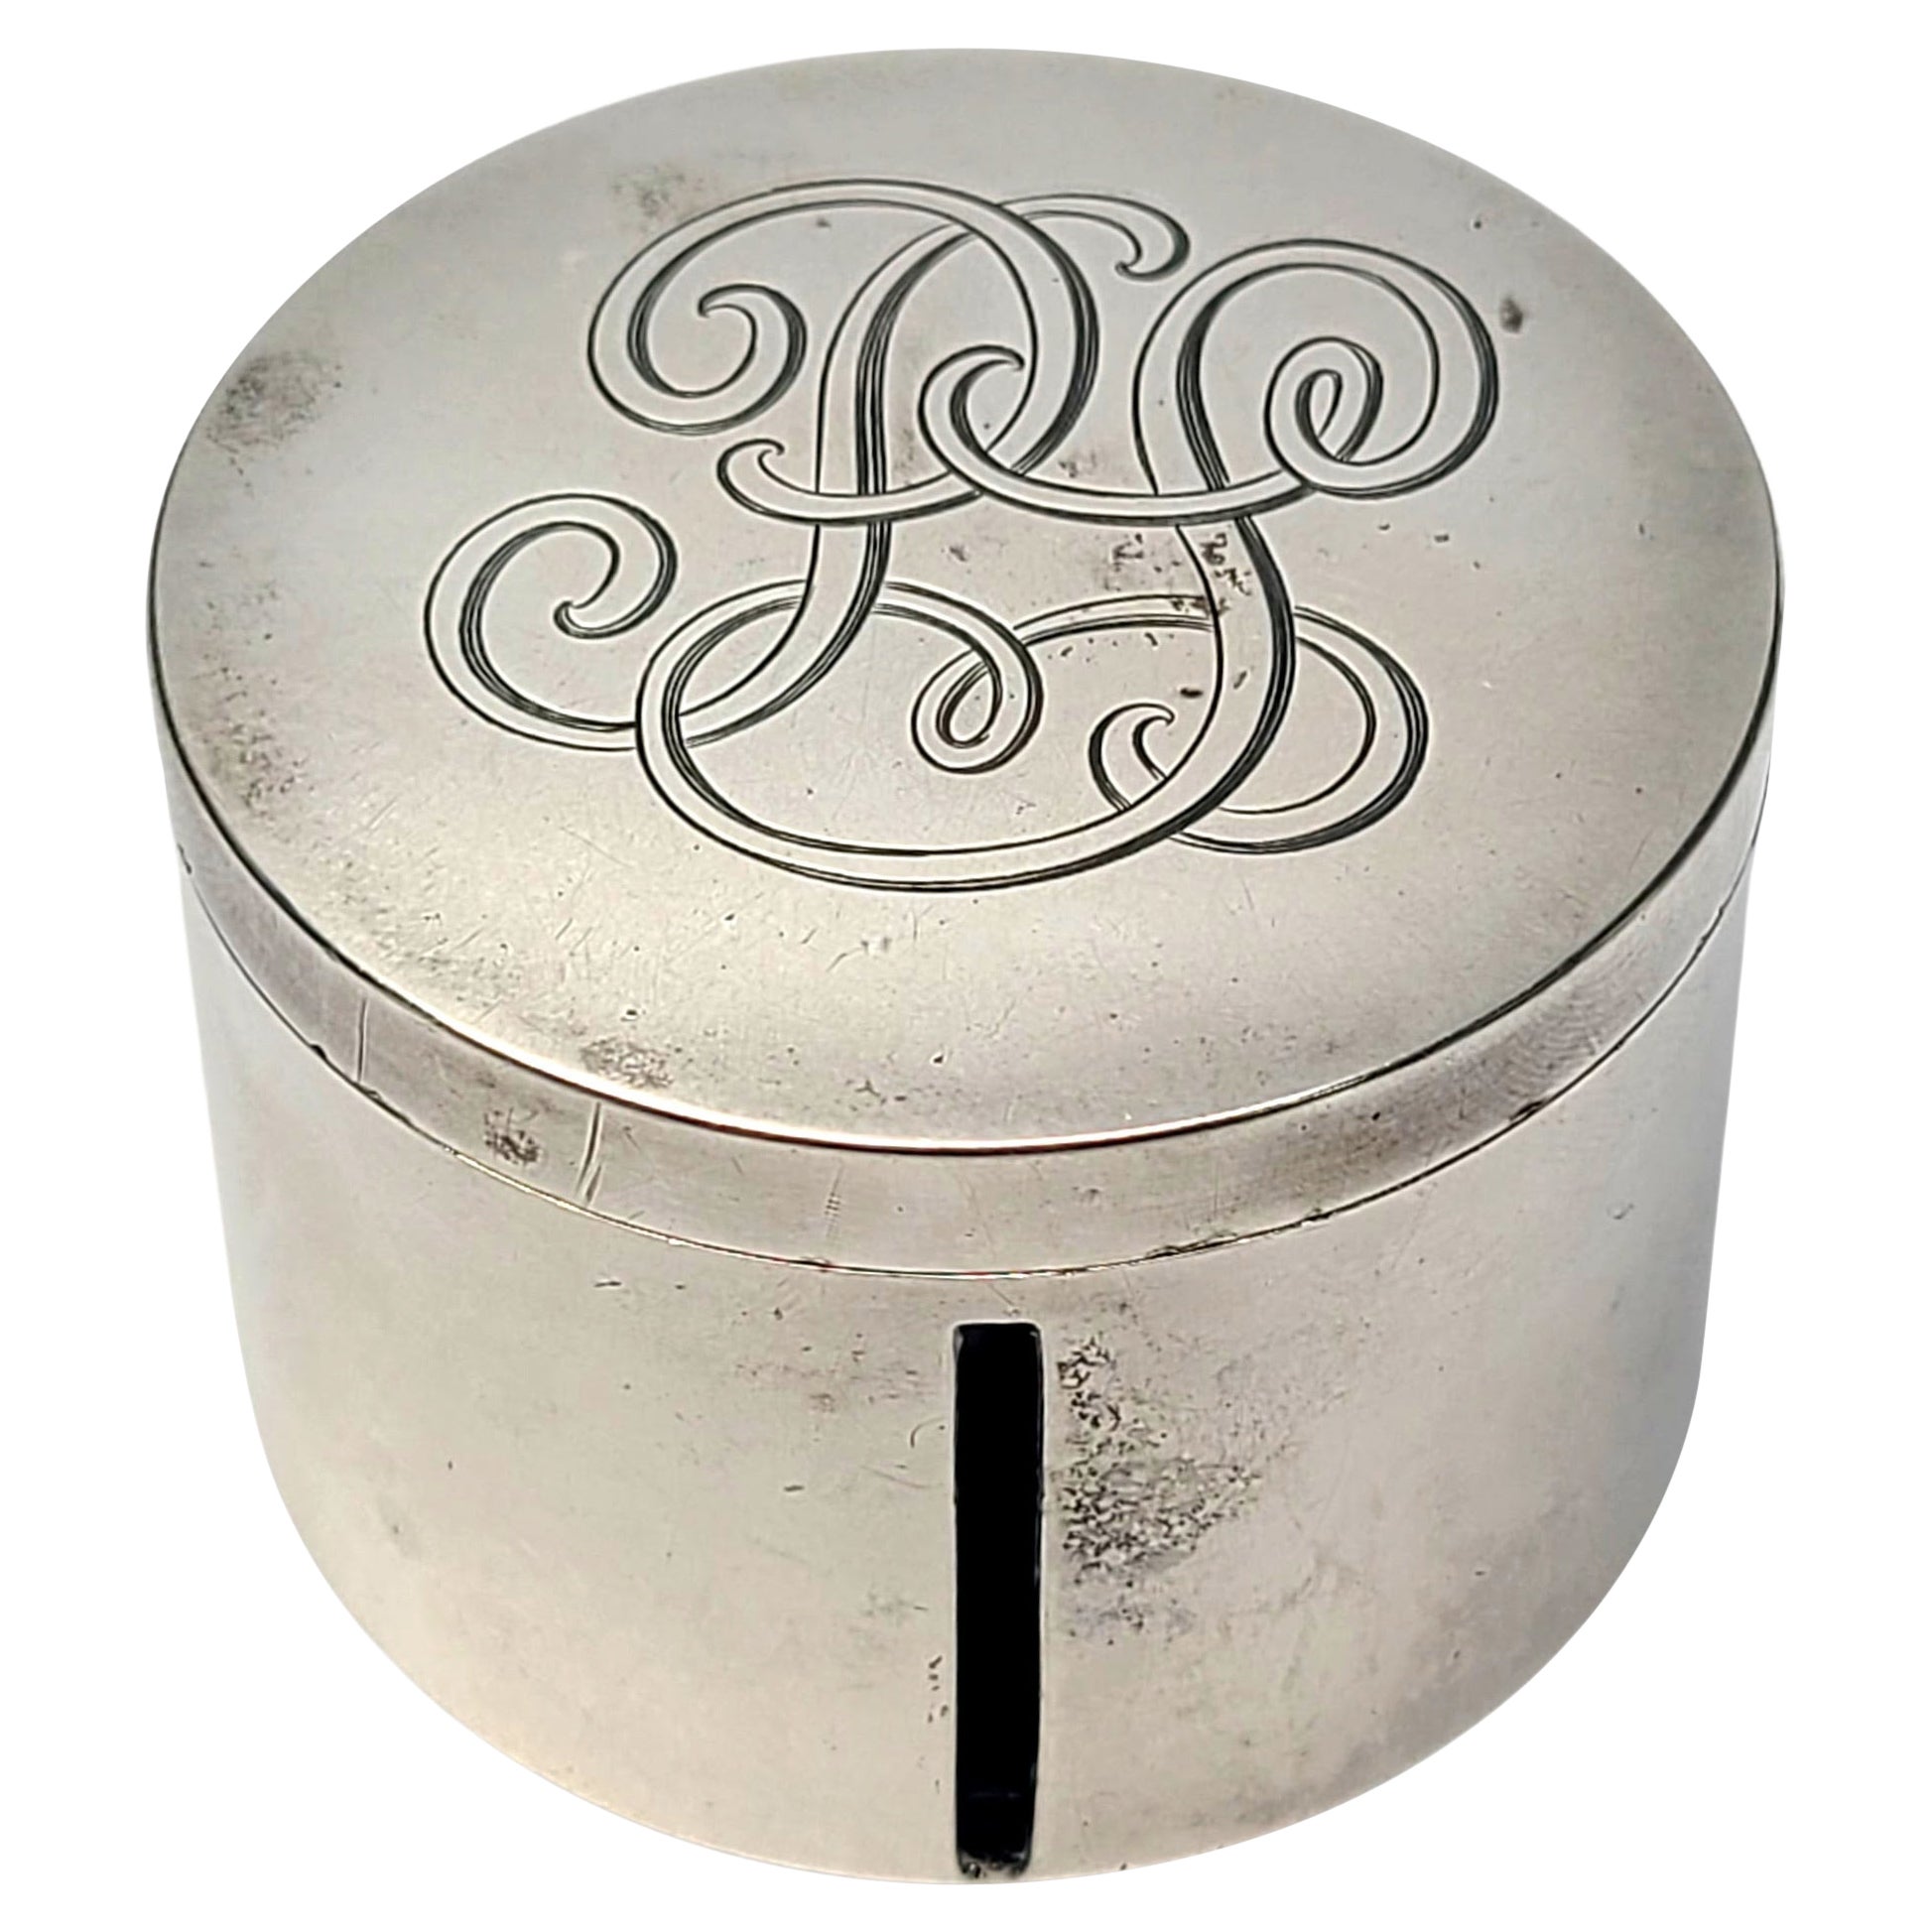 Currier and Roby Sterling Silver Round Stamp Dispenser Box with Monogram